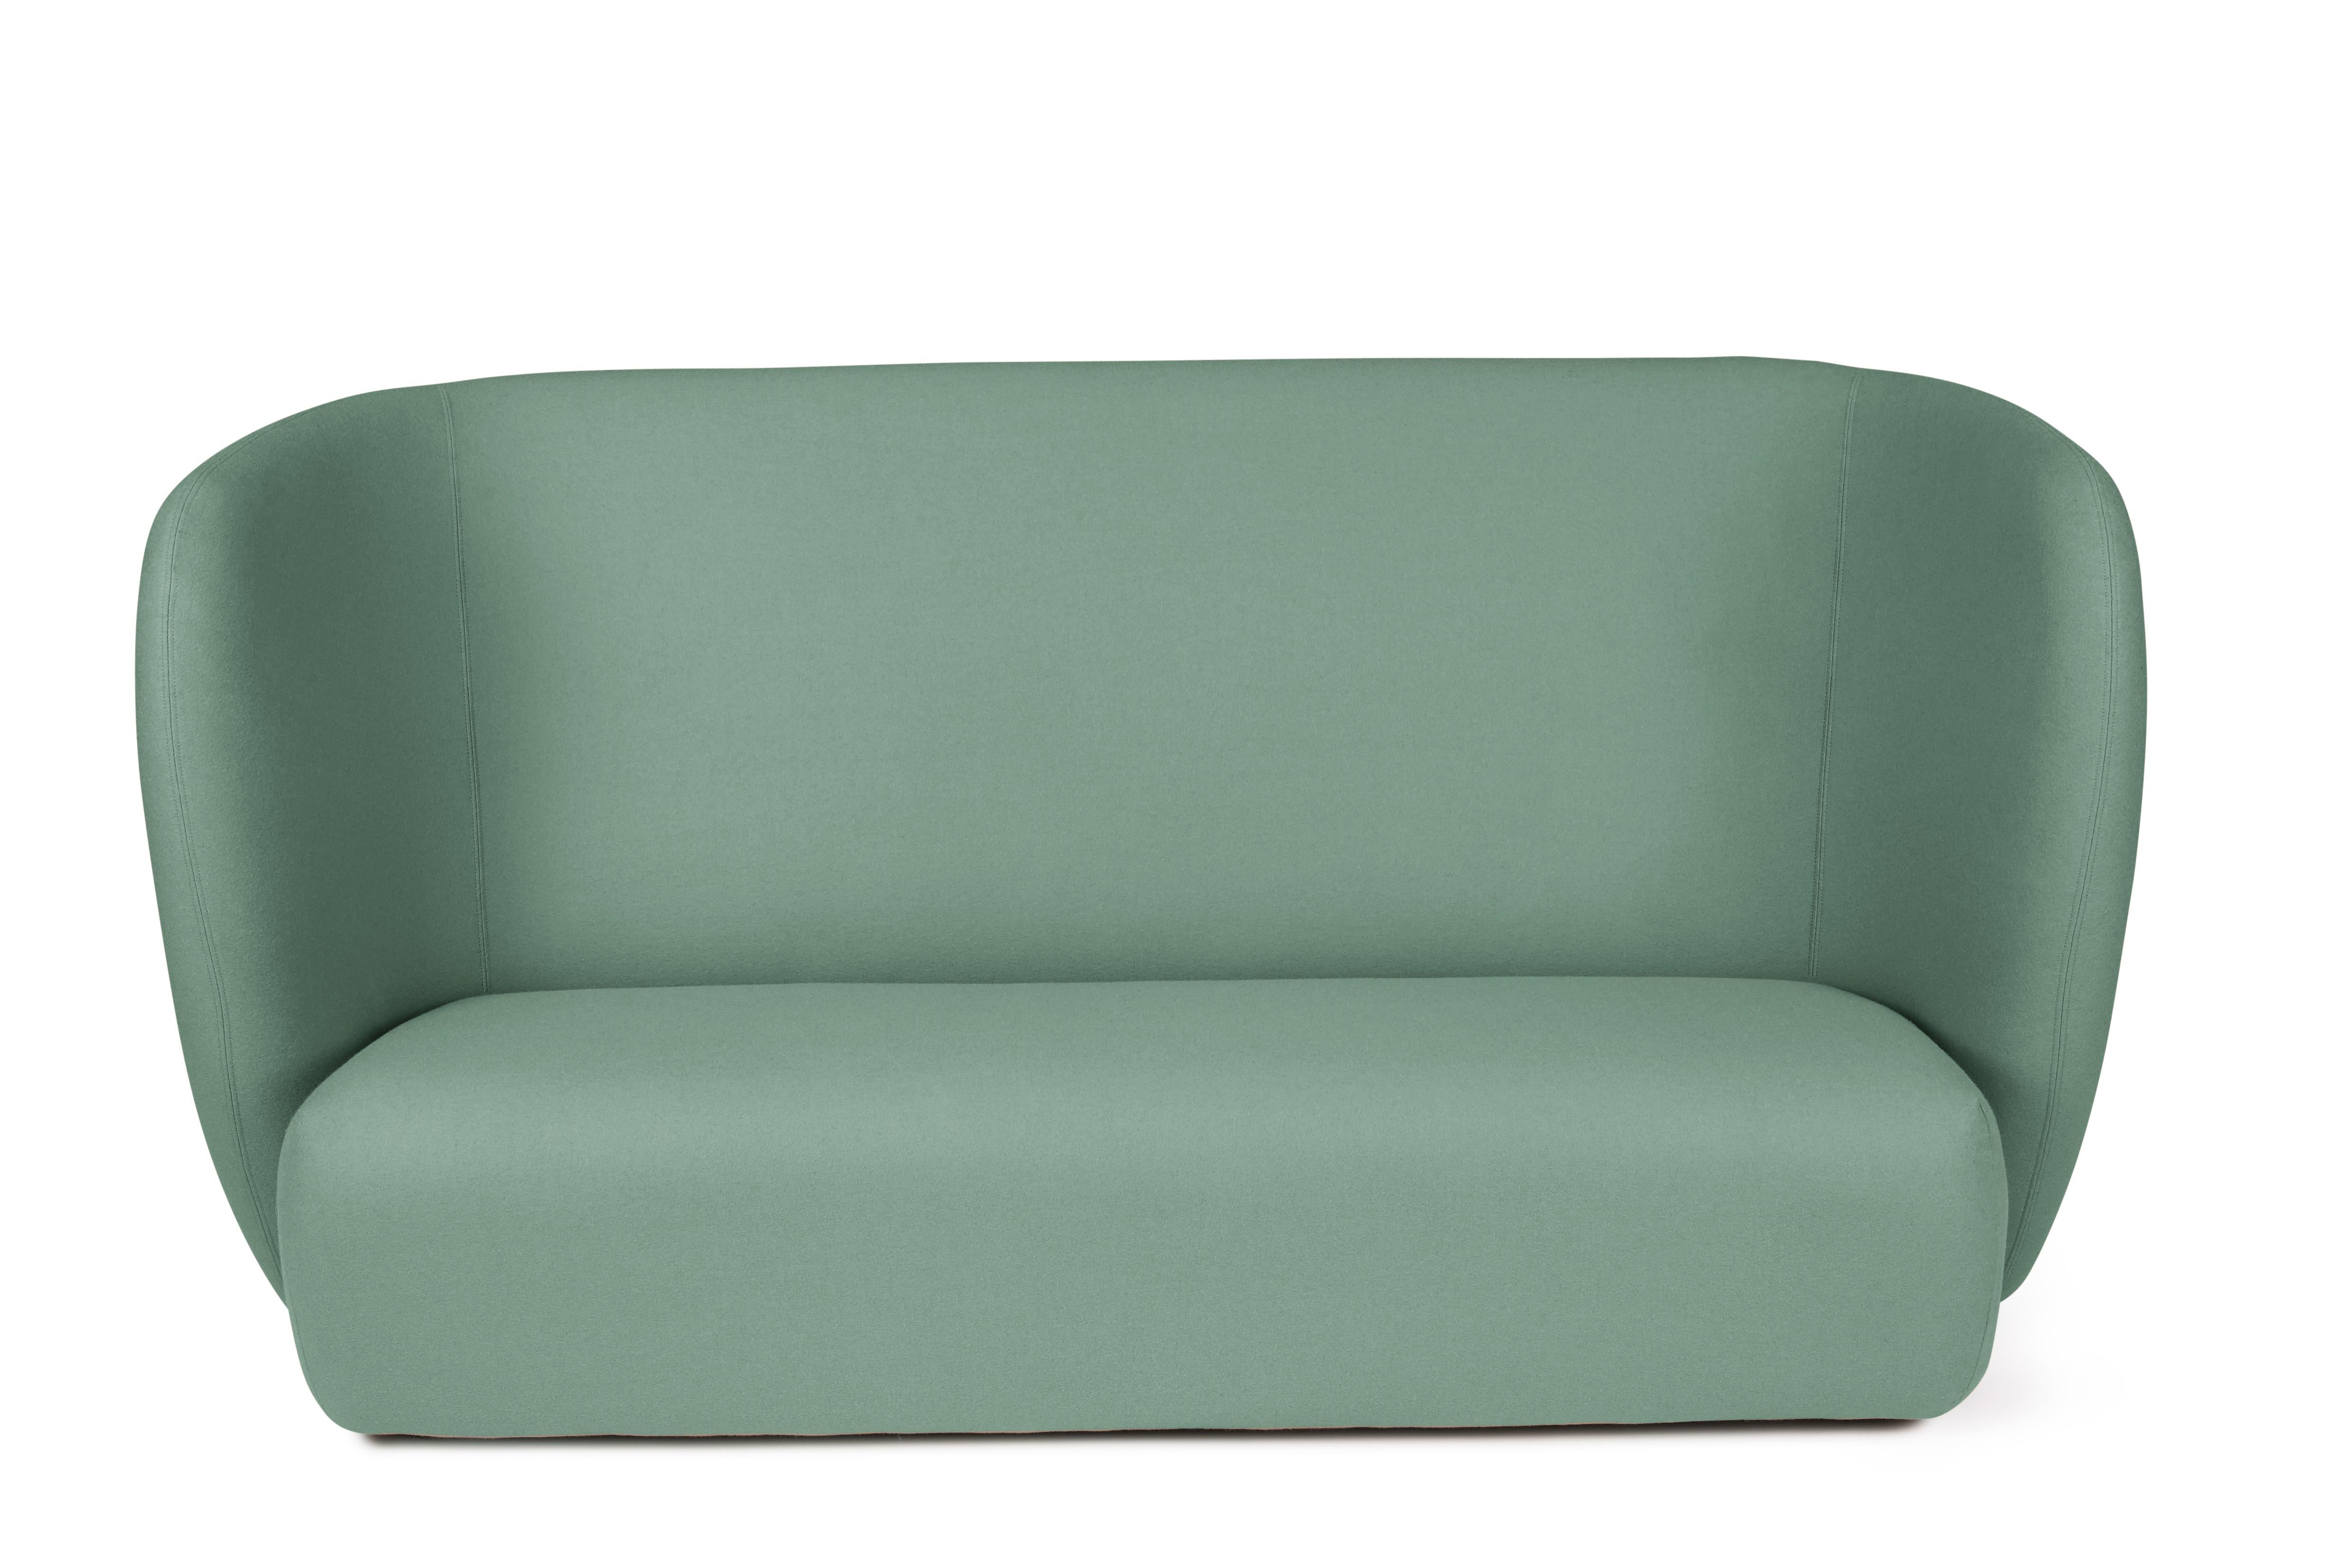 For Sale: Blue (Hero 931) Haven 3-Seat Sofa, by Charlotte Høncke from Warm Nordic